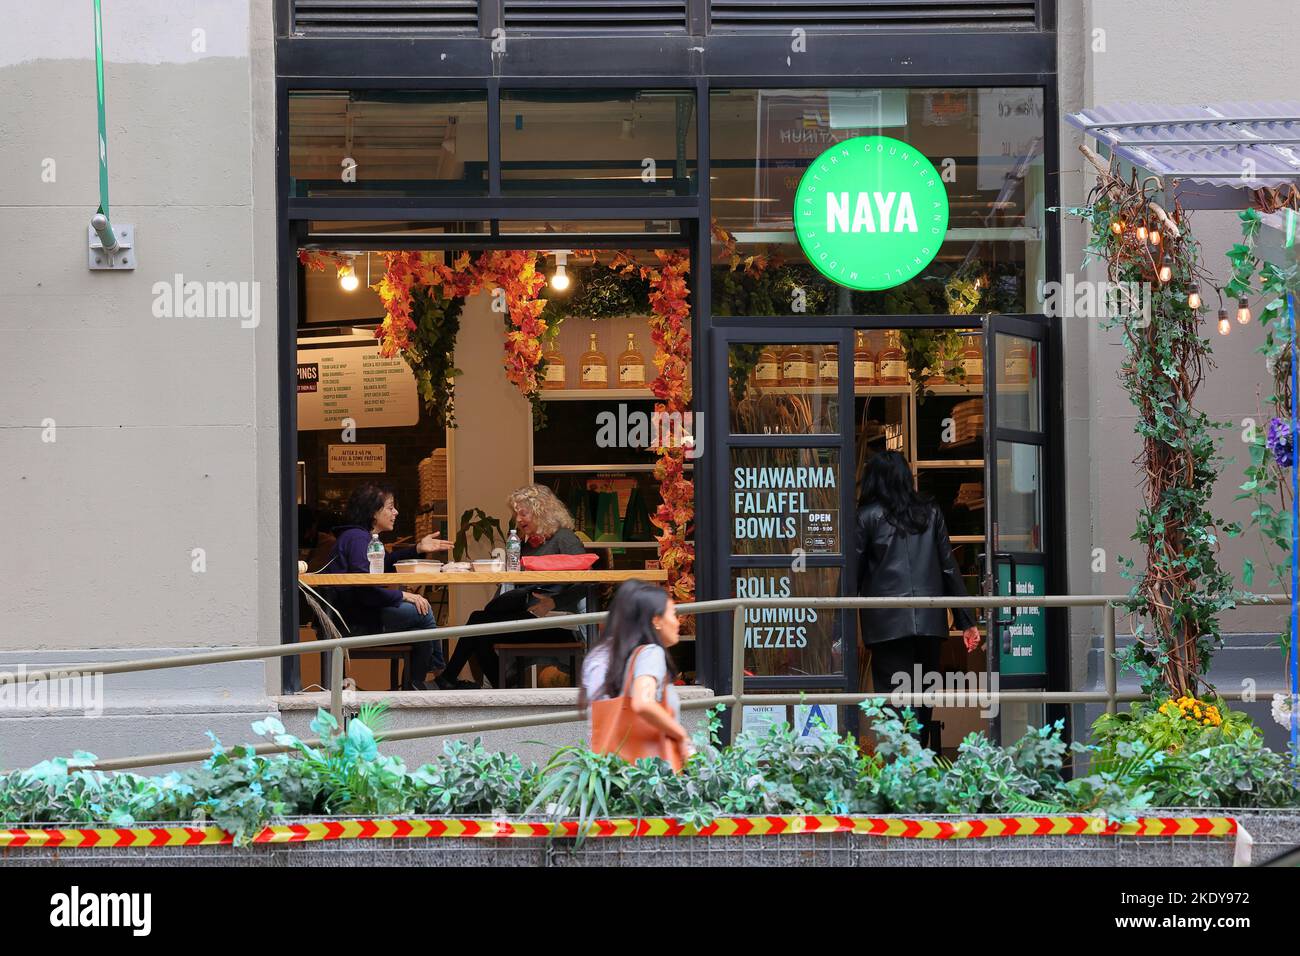 NAYA, 83 University Pl, New York, NYC storefront photo of a Middle Eastern fast casual restaurant in the Greenwich Village neighborhood. Stock Photo